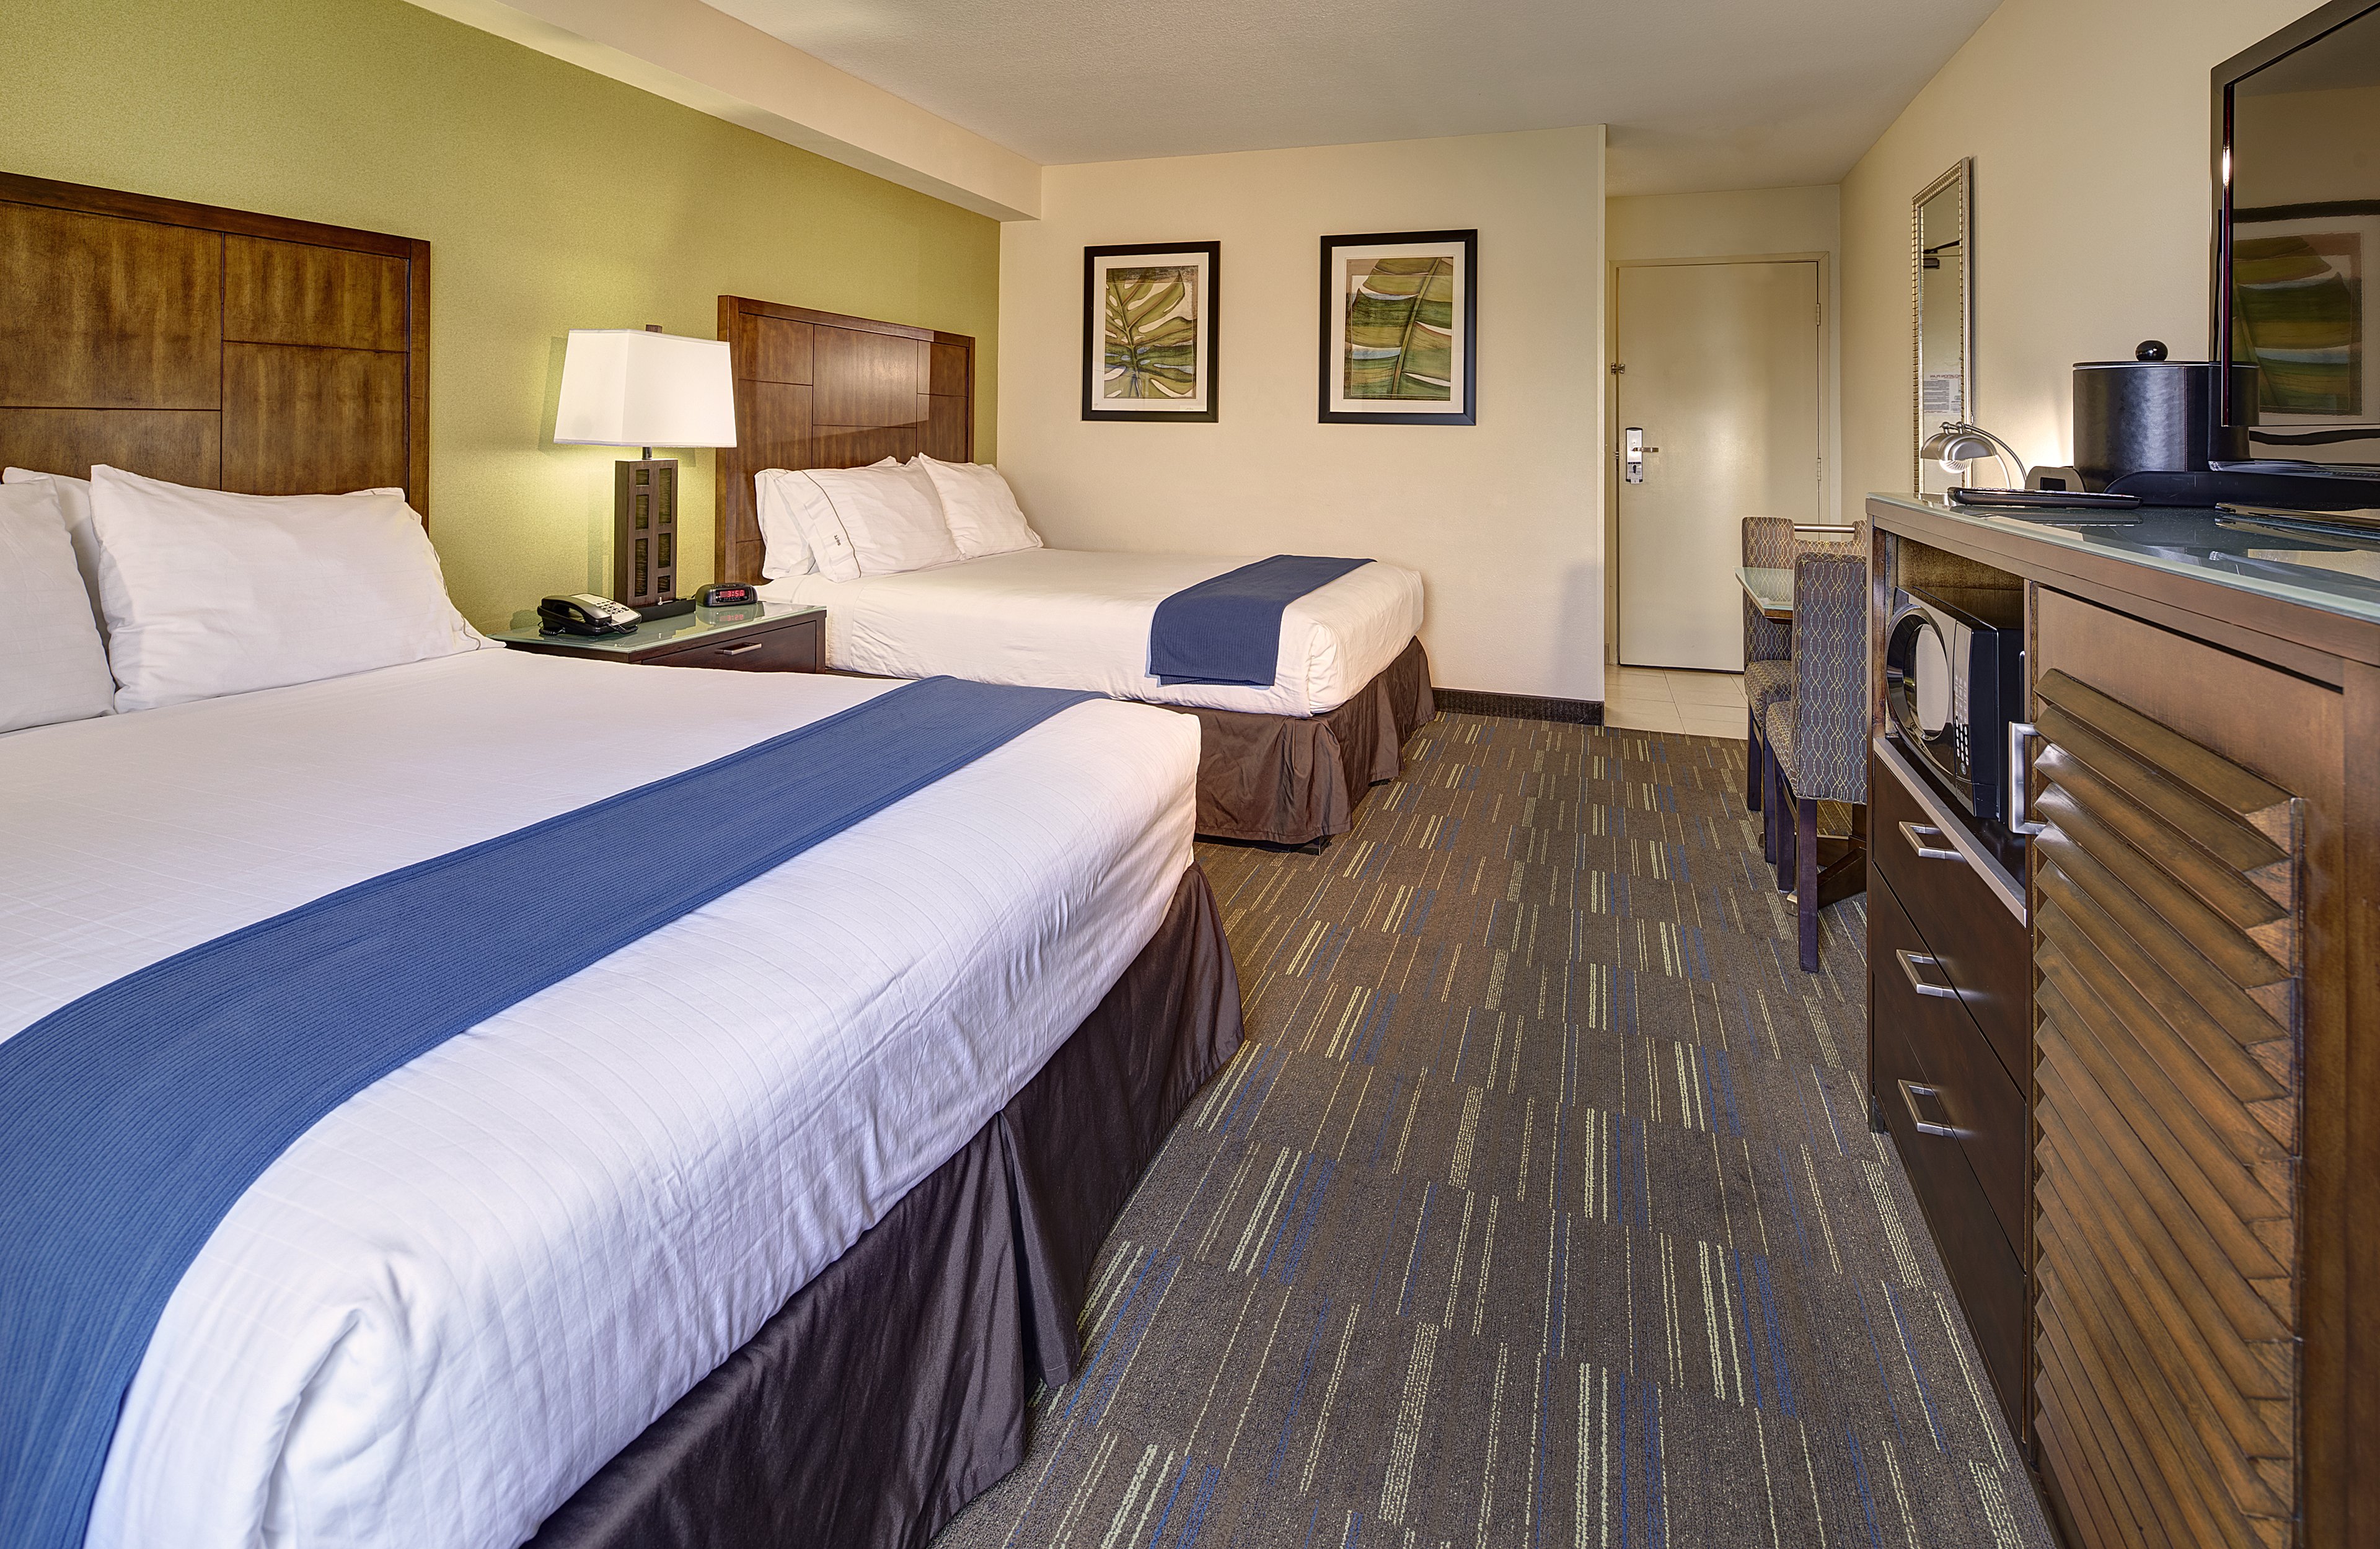 Our Two Queen Bed Room can comfortably sleep up to four guests.